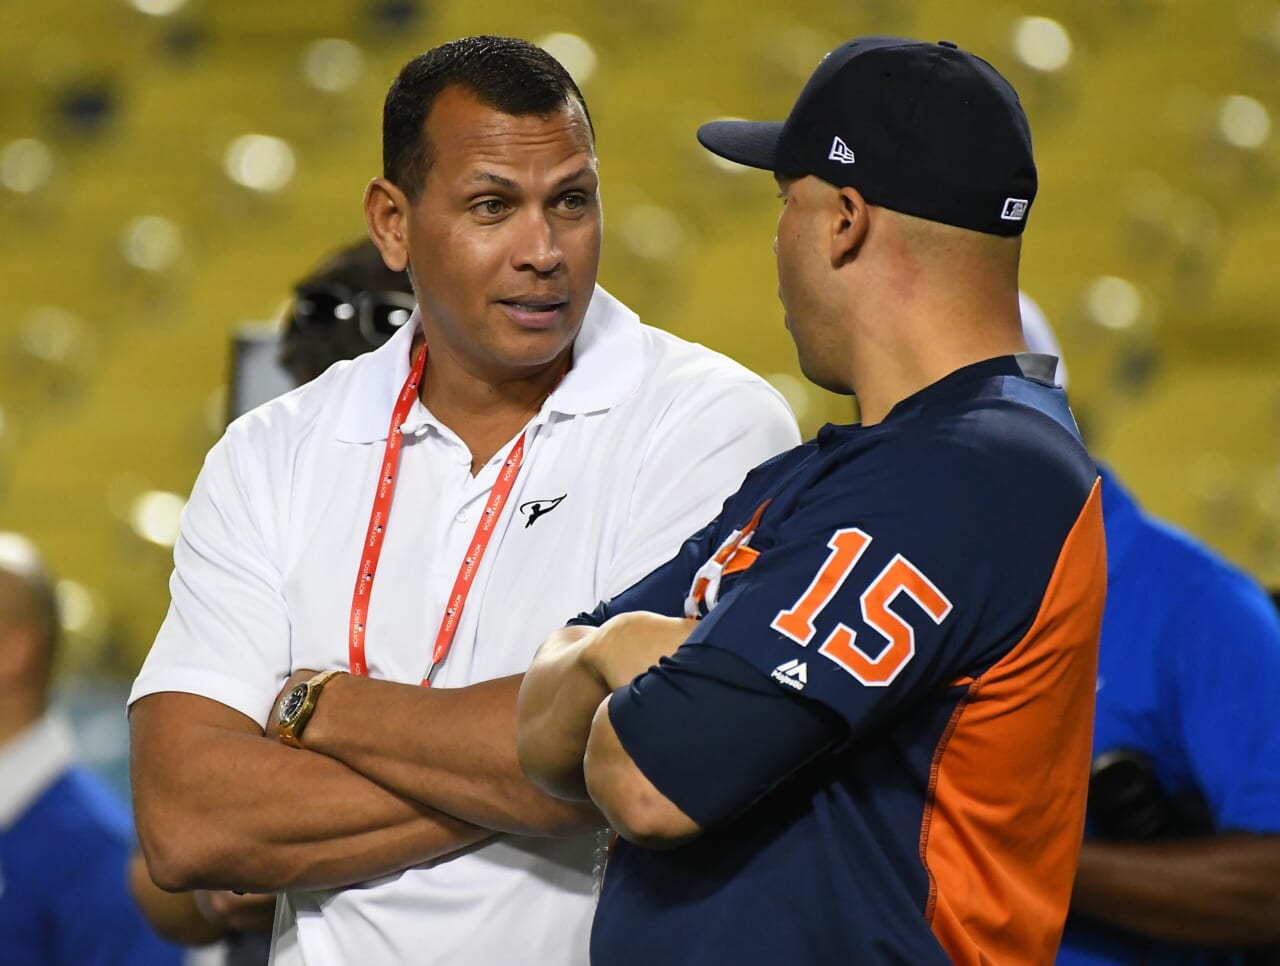 Former New York Mets catcher Paul LoDuca rips A-Rod: “One of the fakest people out there”